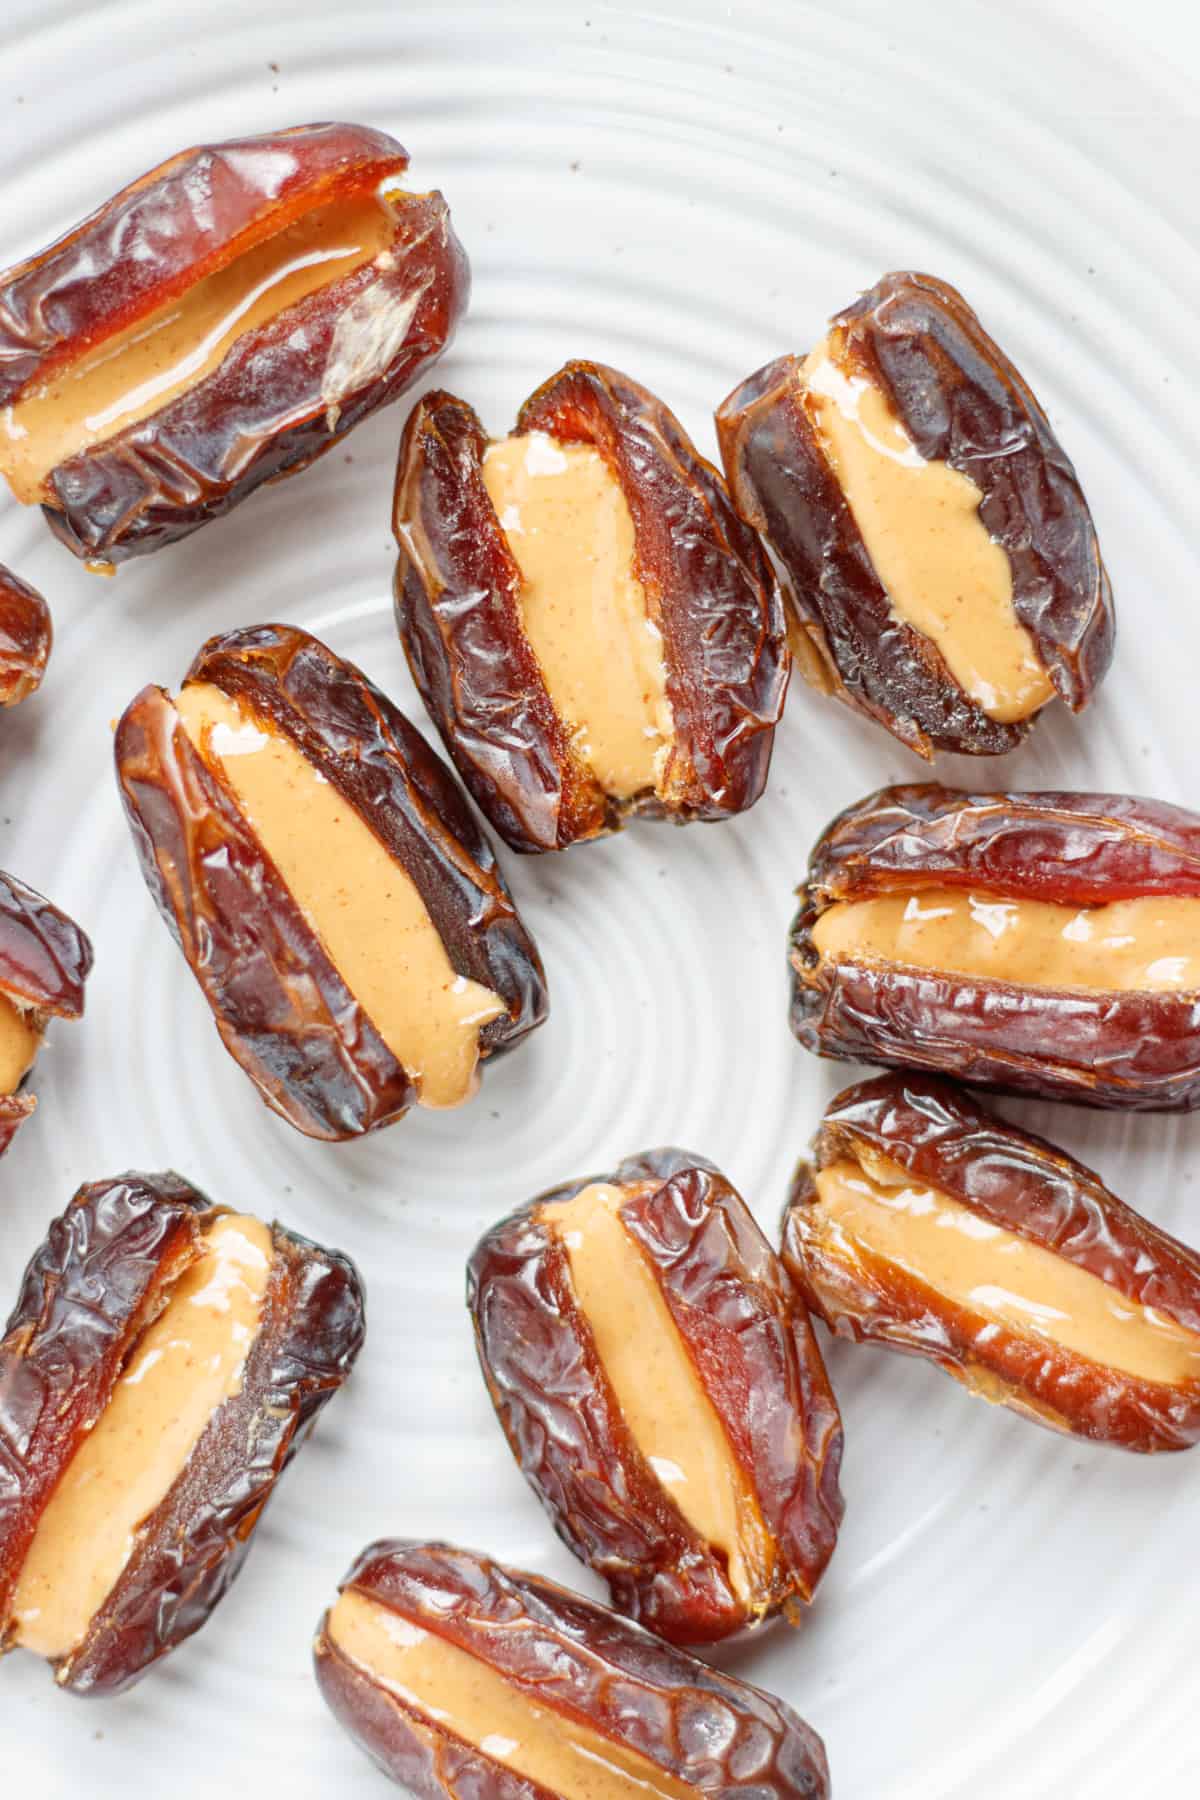 Dates filled with peanut butter.